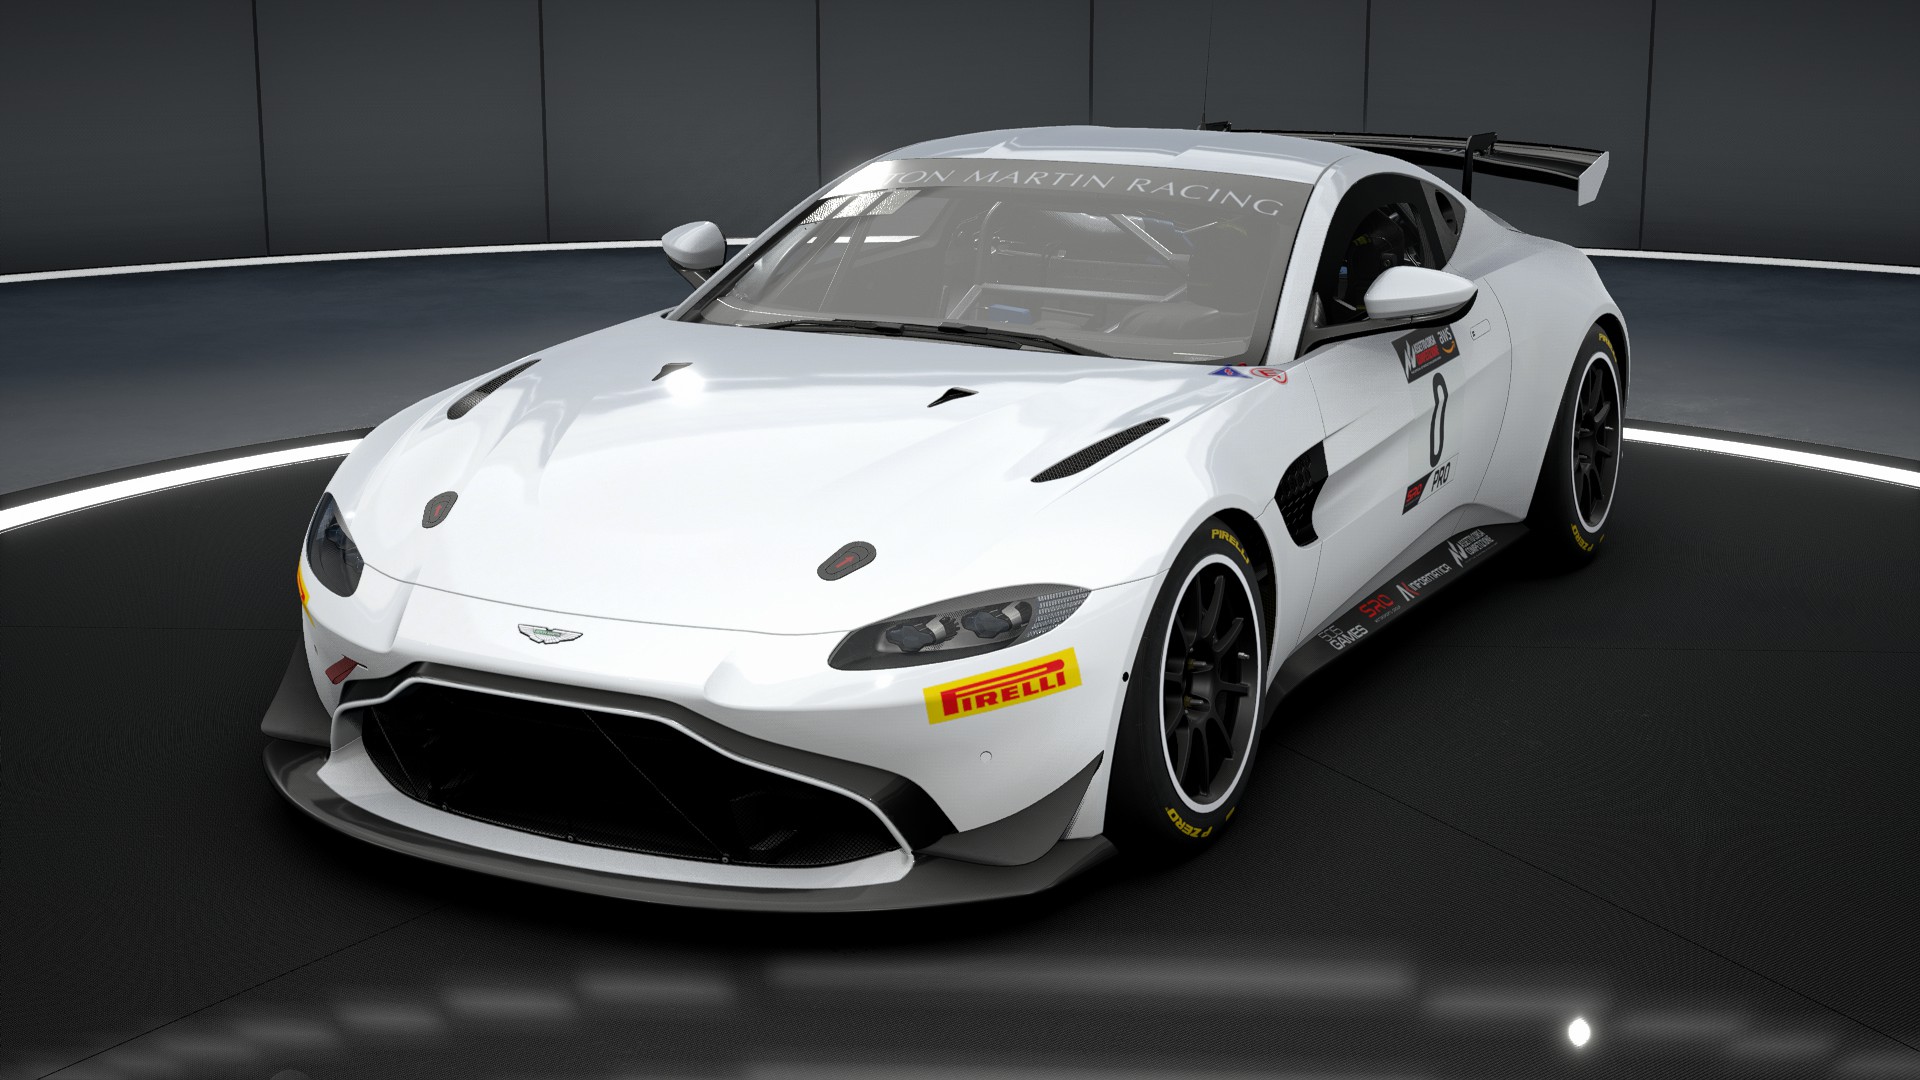 Assetto Corsa Competizione Balance of Performance Changes GT3 & GT4 - Aston Martin AMR V8 Vantage GT4 2018 - F144462